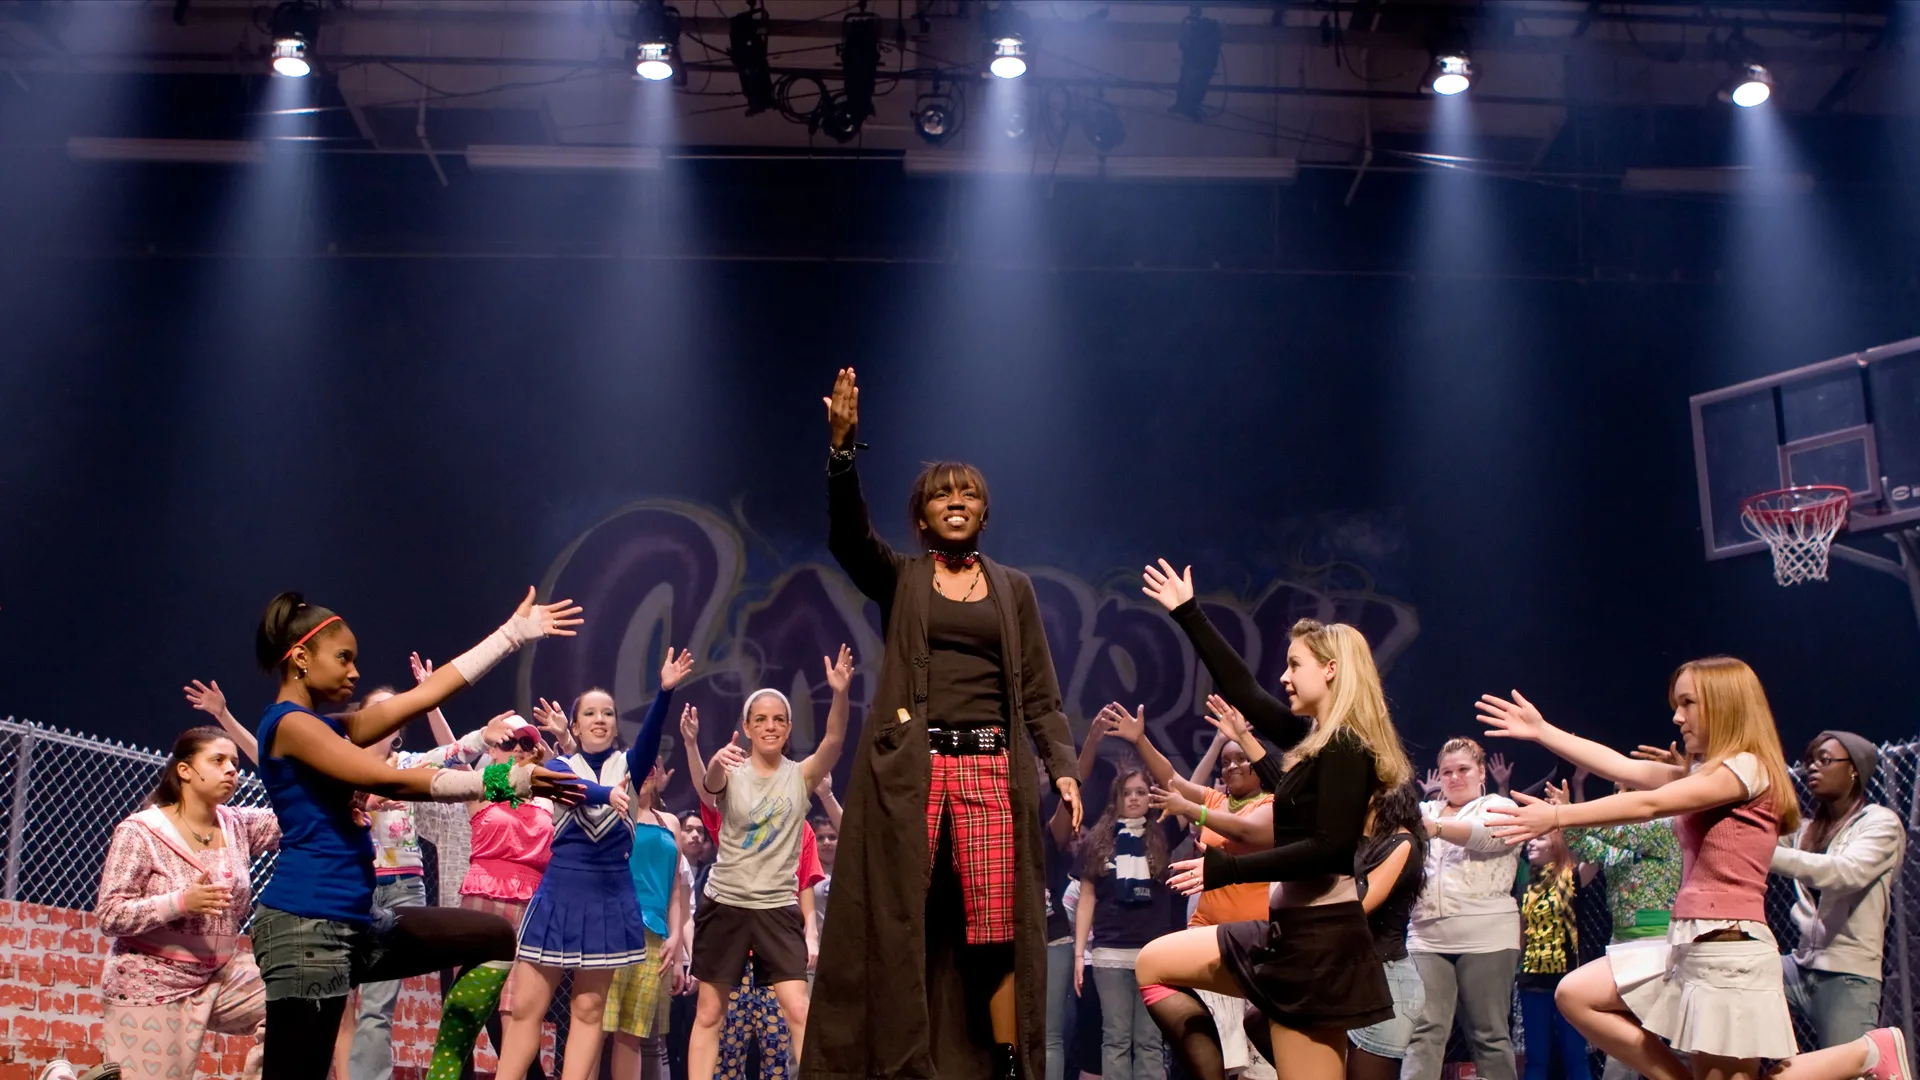 A photograph of a school production mid-performance on stage